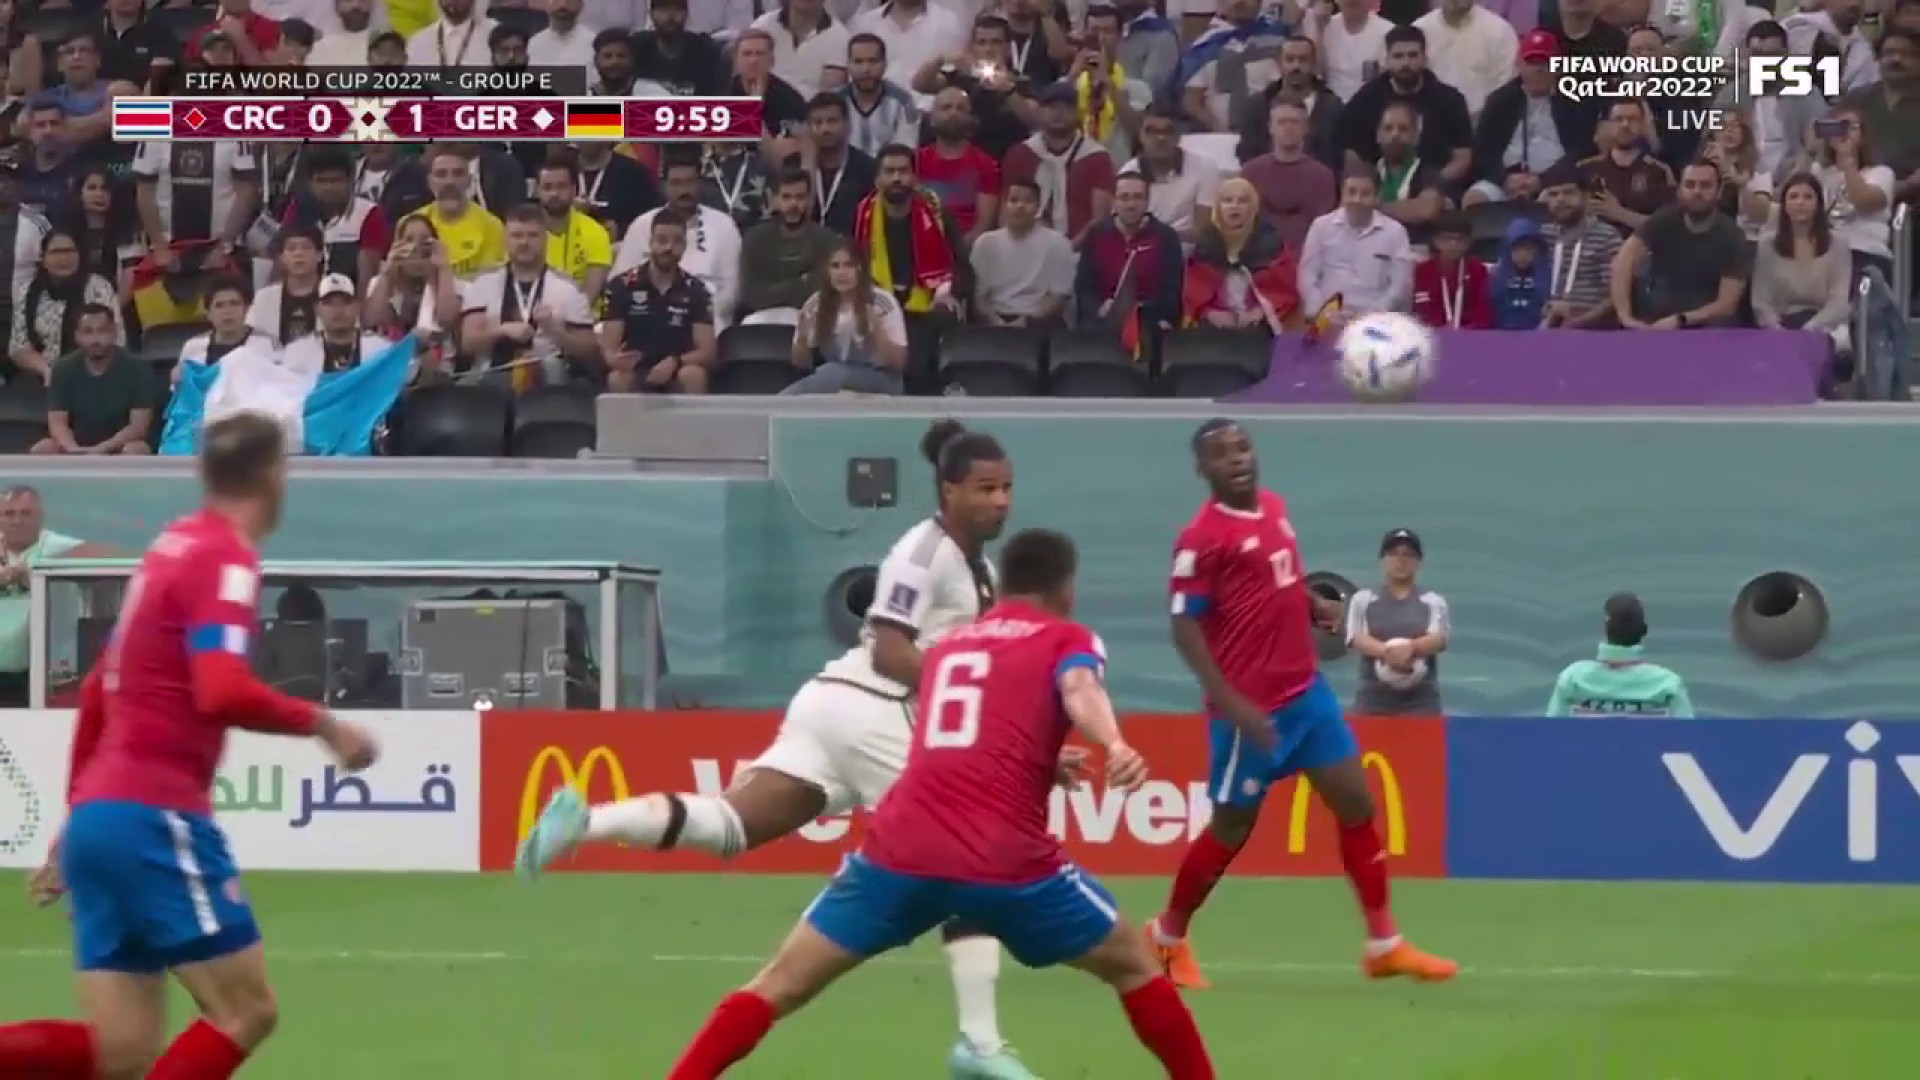 Another look at this goal by Gnabry for Germany 🇩🇪”